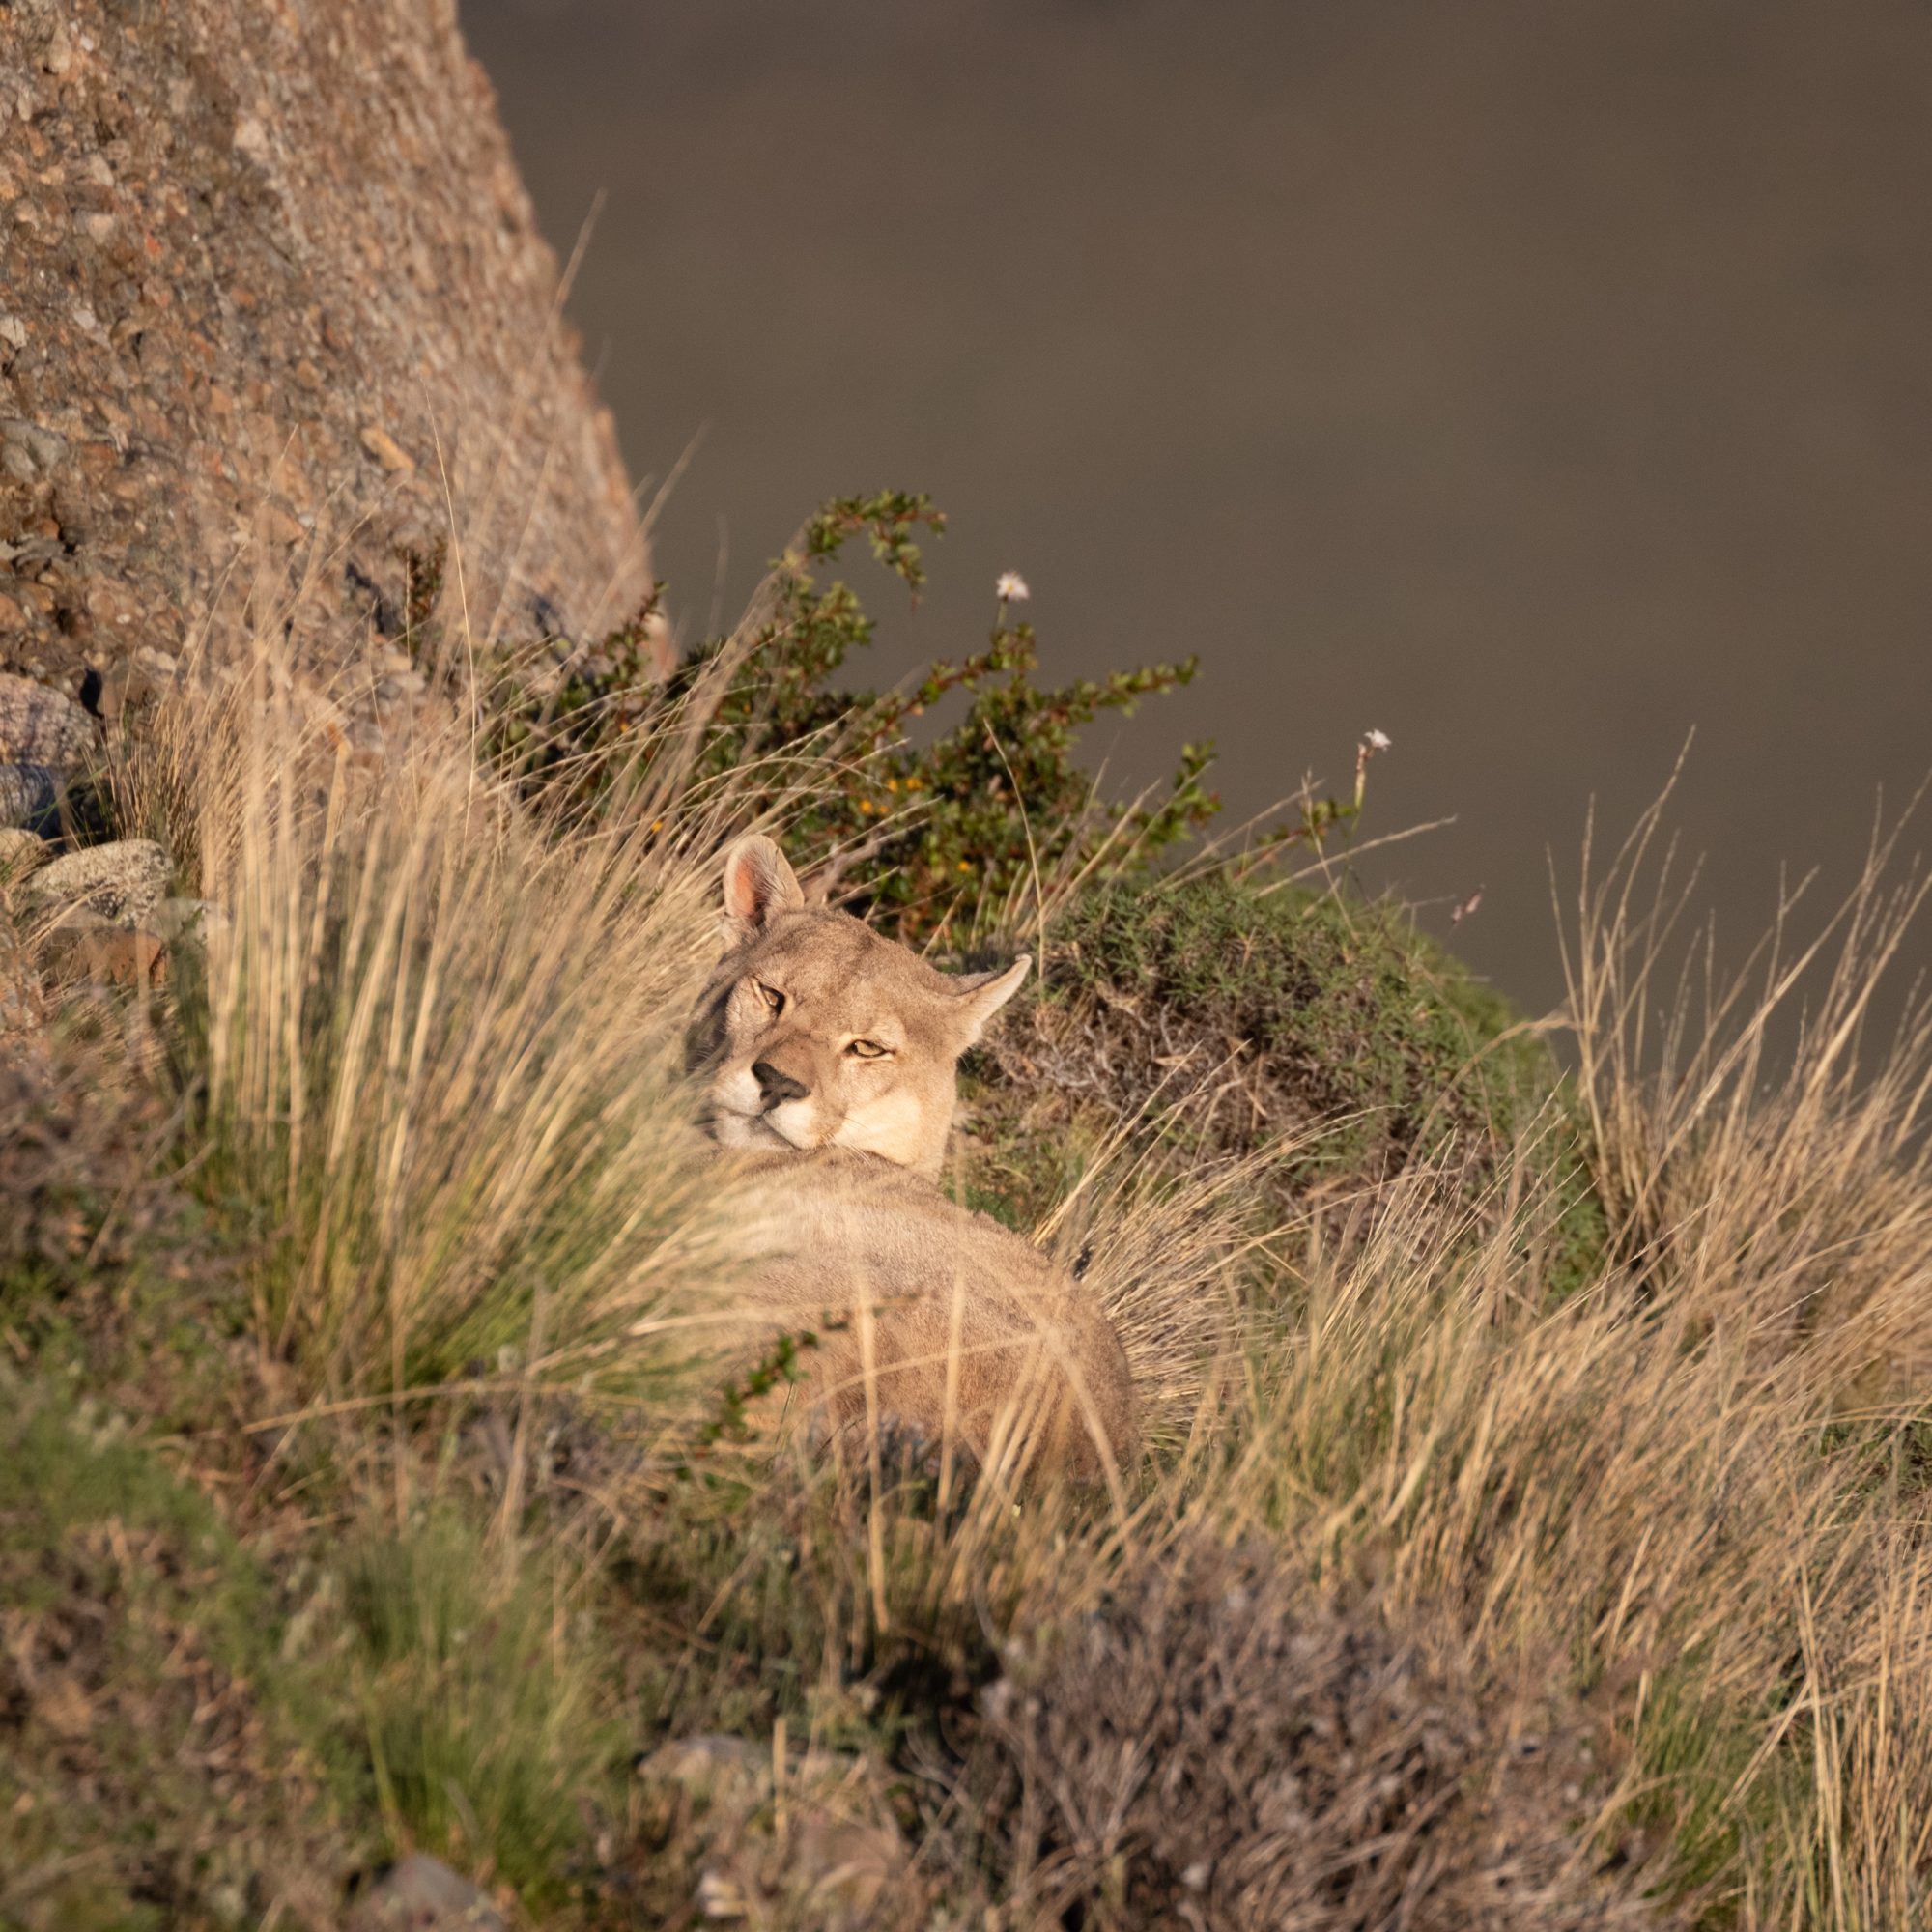 Male Puma high up on a hill – Patagonia, Chile 2018